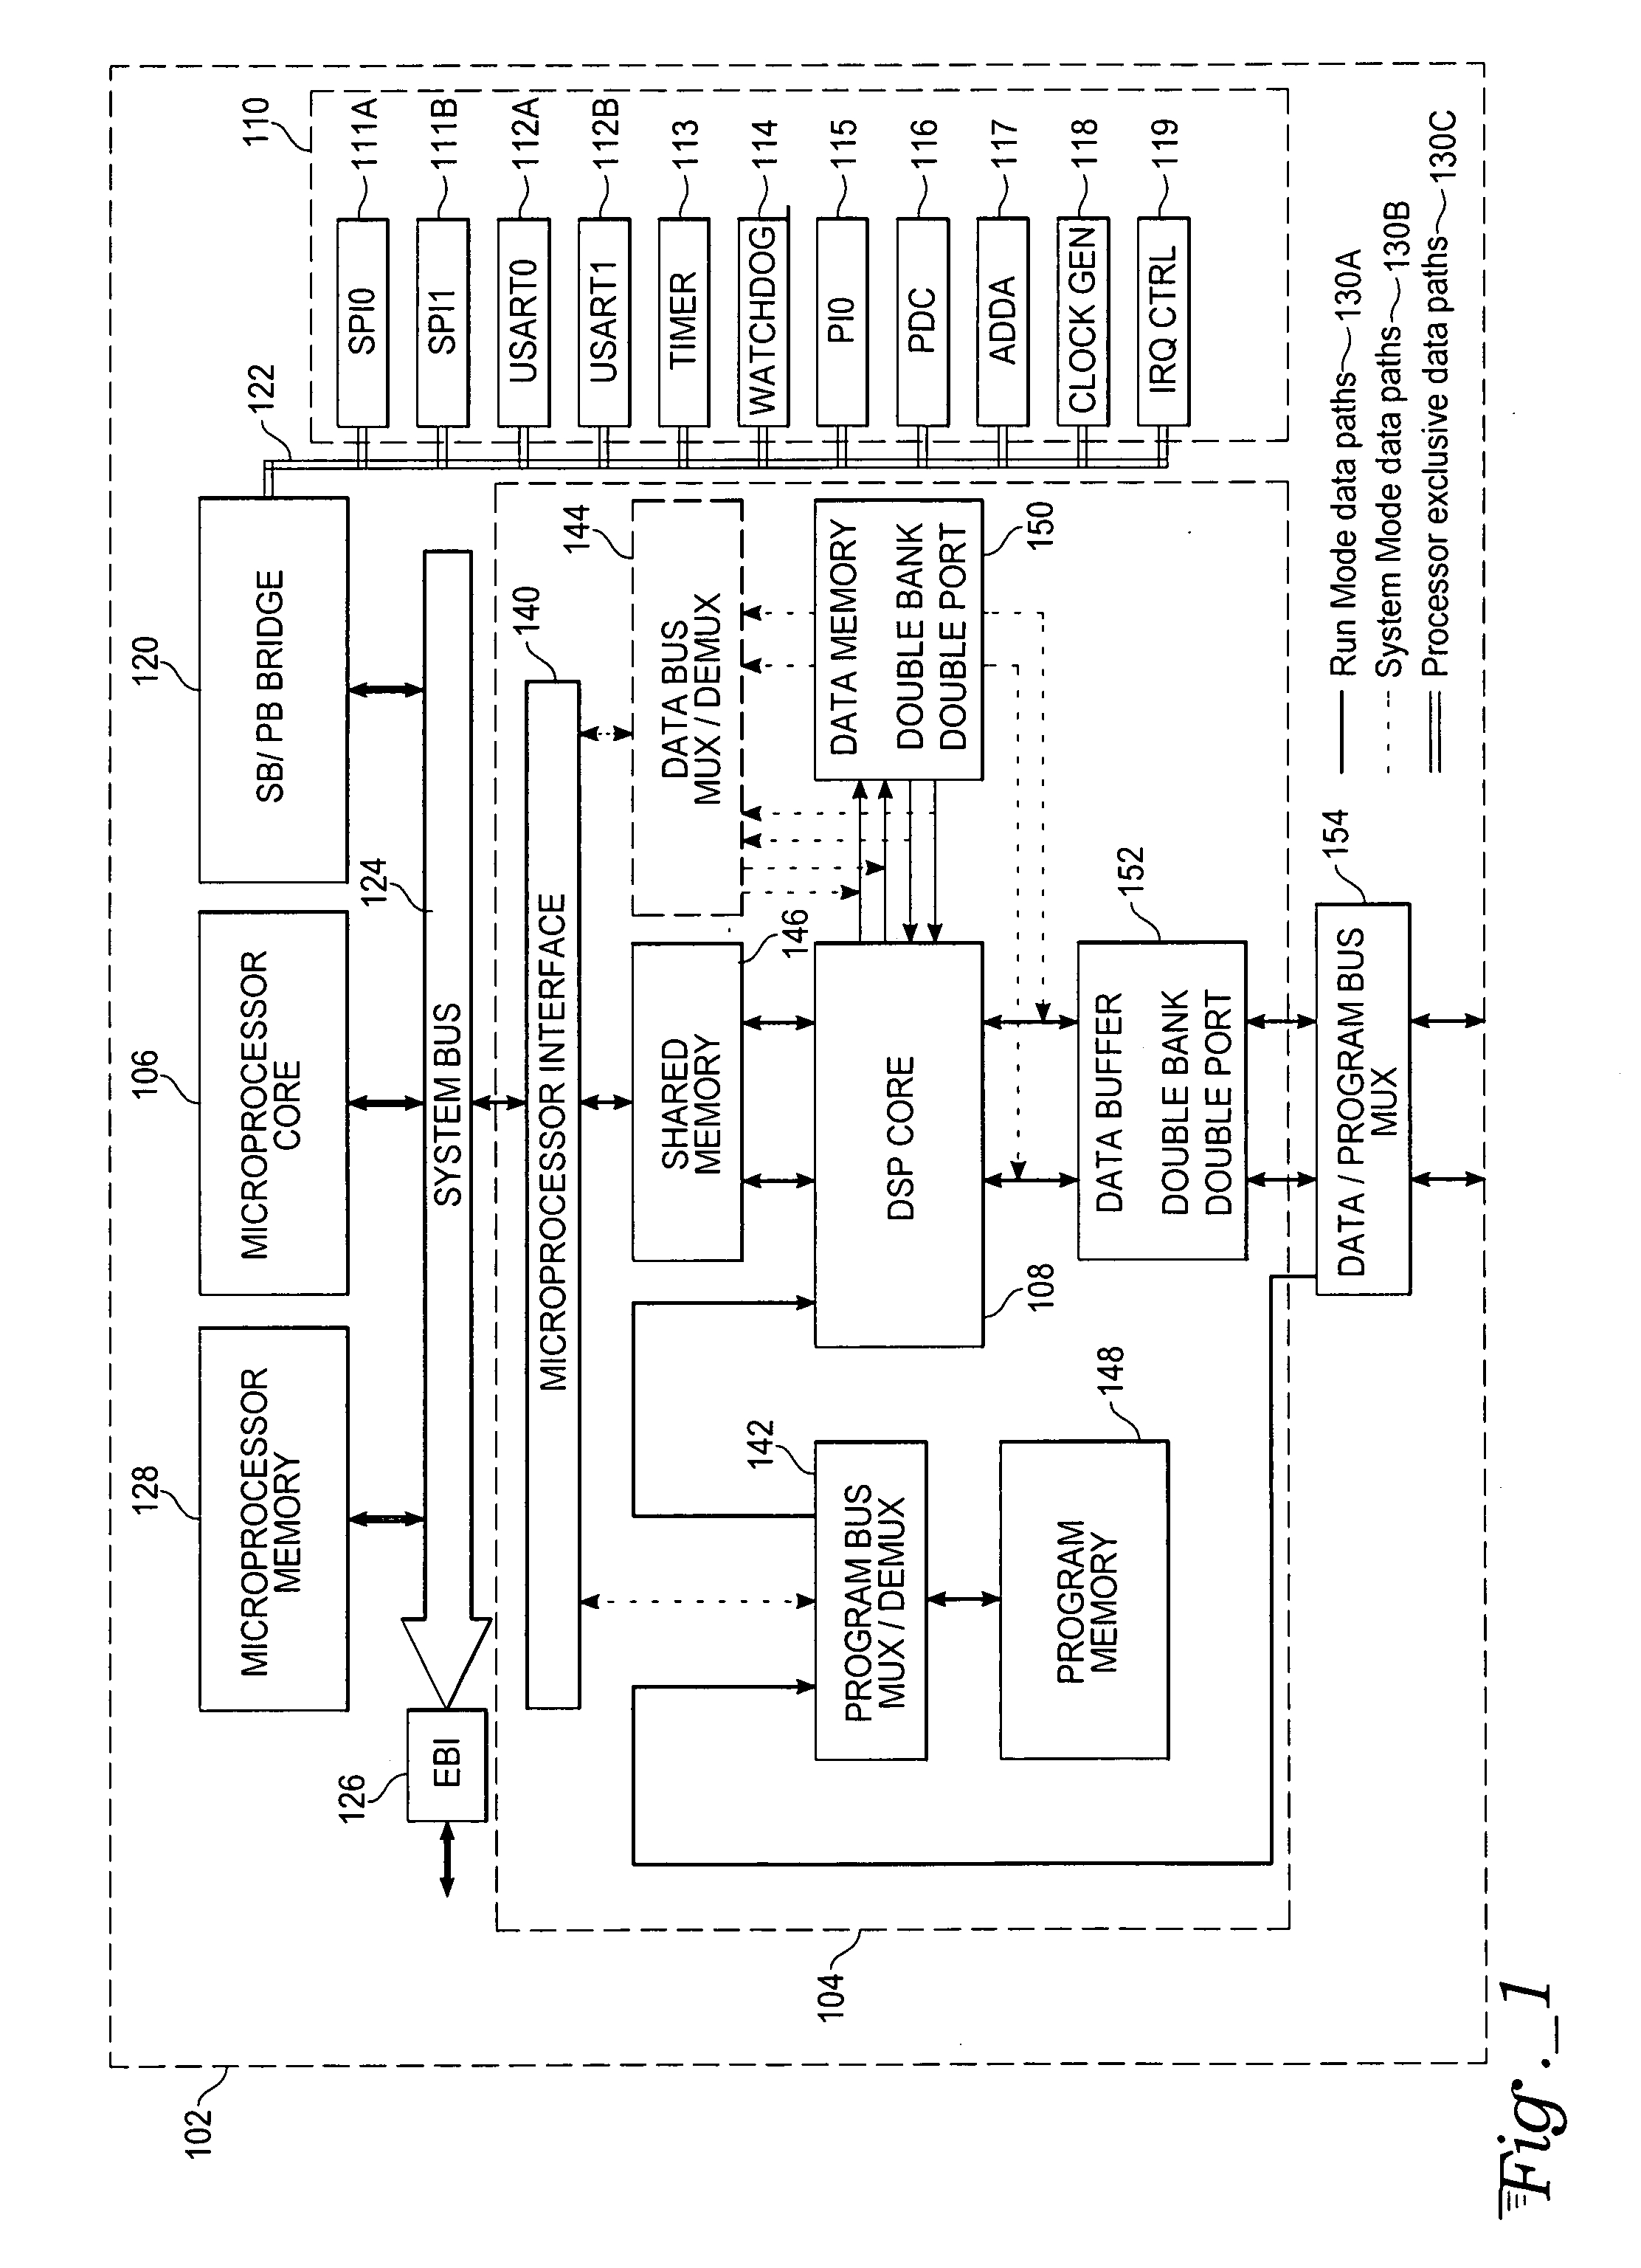 Dual-processor complex domain floating-point DSP system on chip